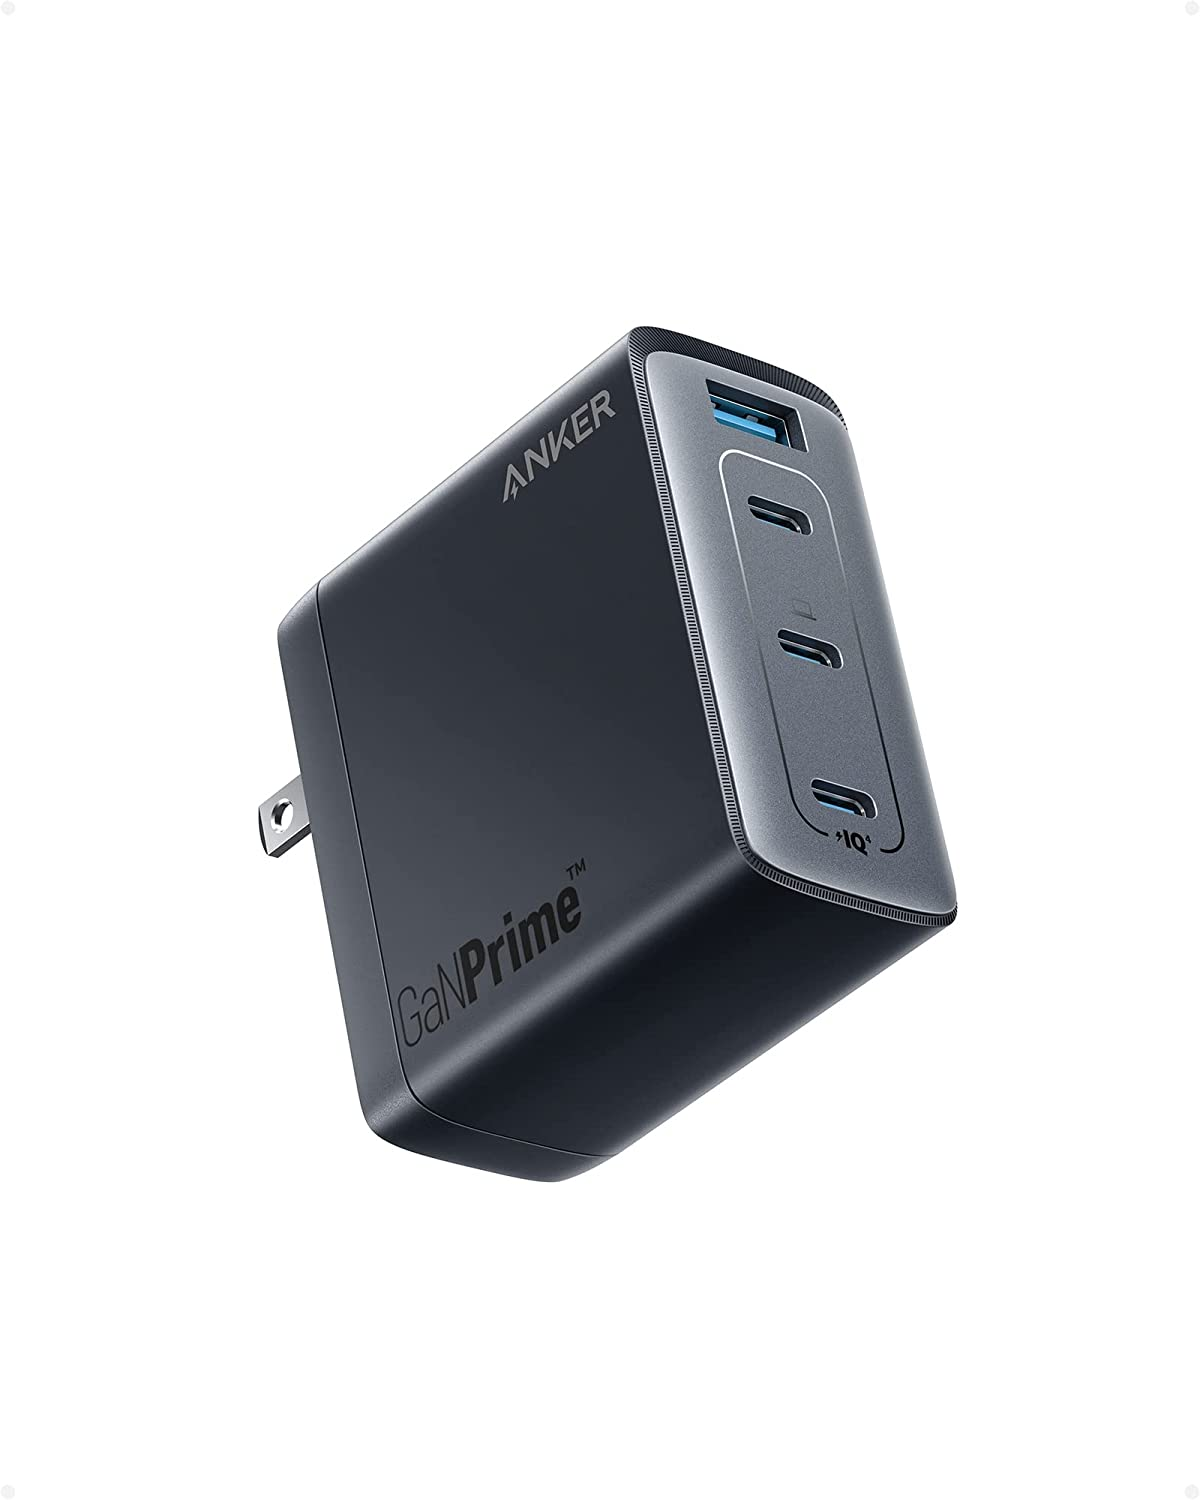 Anker USB C 747 GaNPrime 150W, PPS 4-Port Fast Compact Foldable Wall Charger $87.99